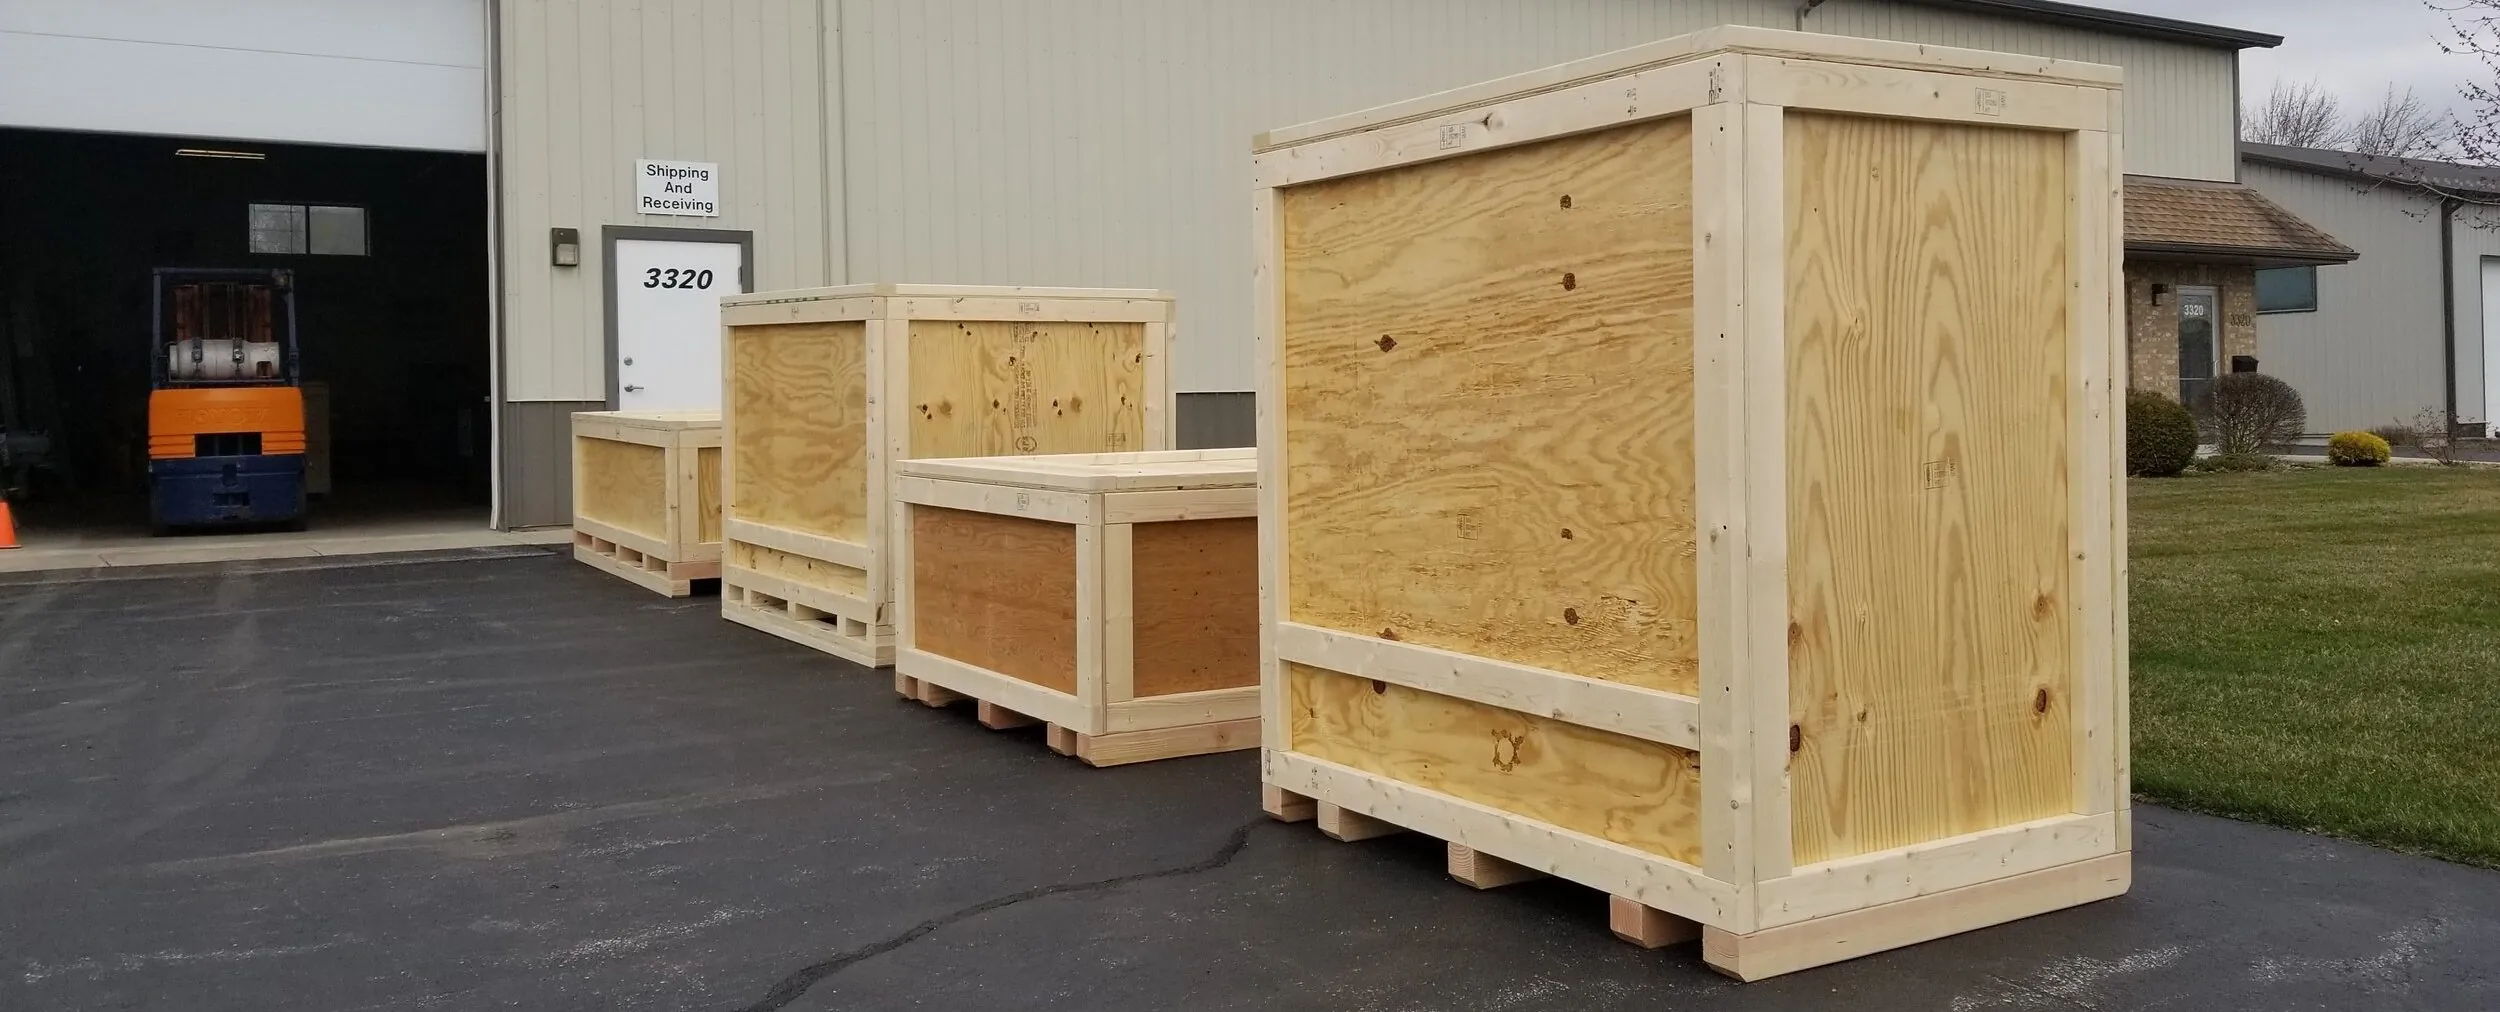 different sized wooden shipping crates